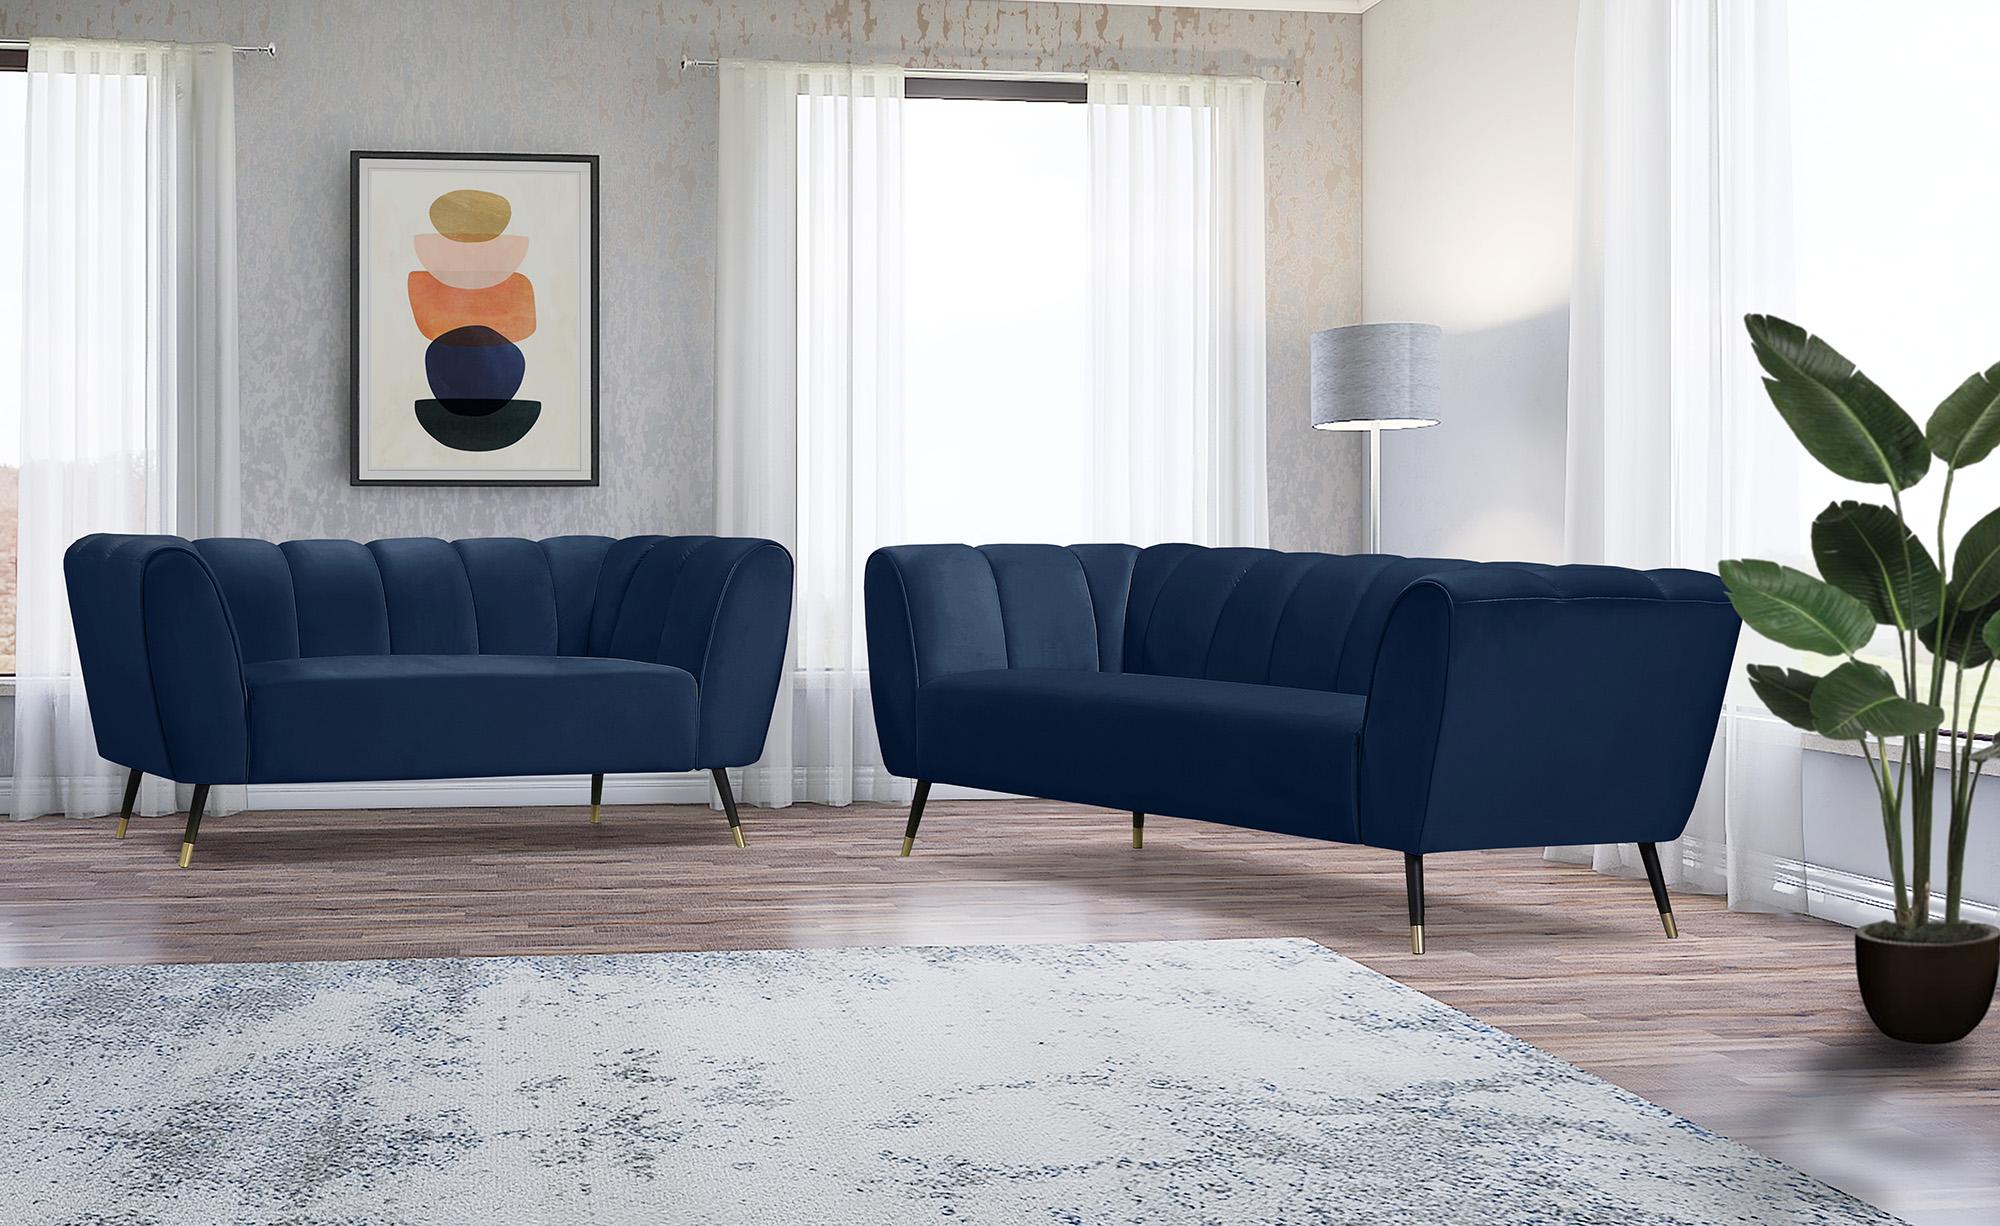 

    
626Navy-S Navy Velvet Channel Tufted Sofa BEAUMONT 626Navy-S Meridian Contemporary Modern
